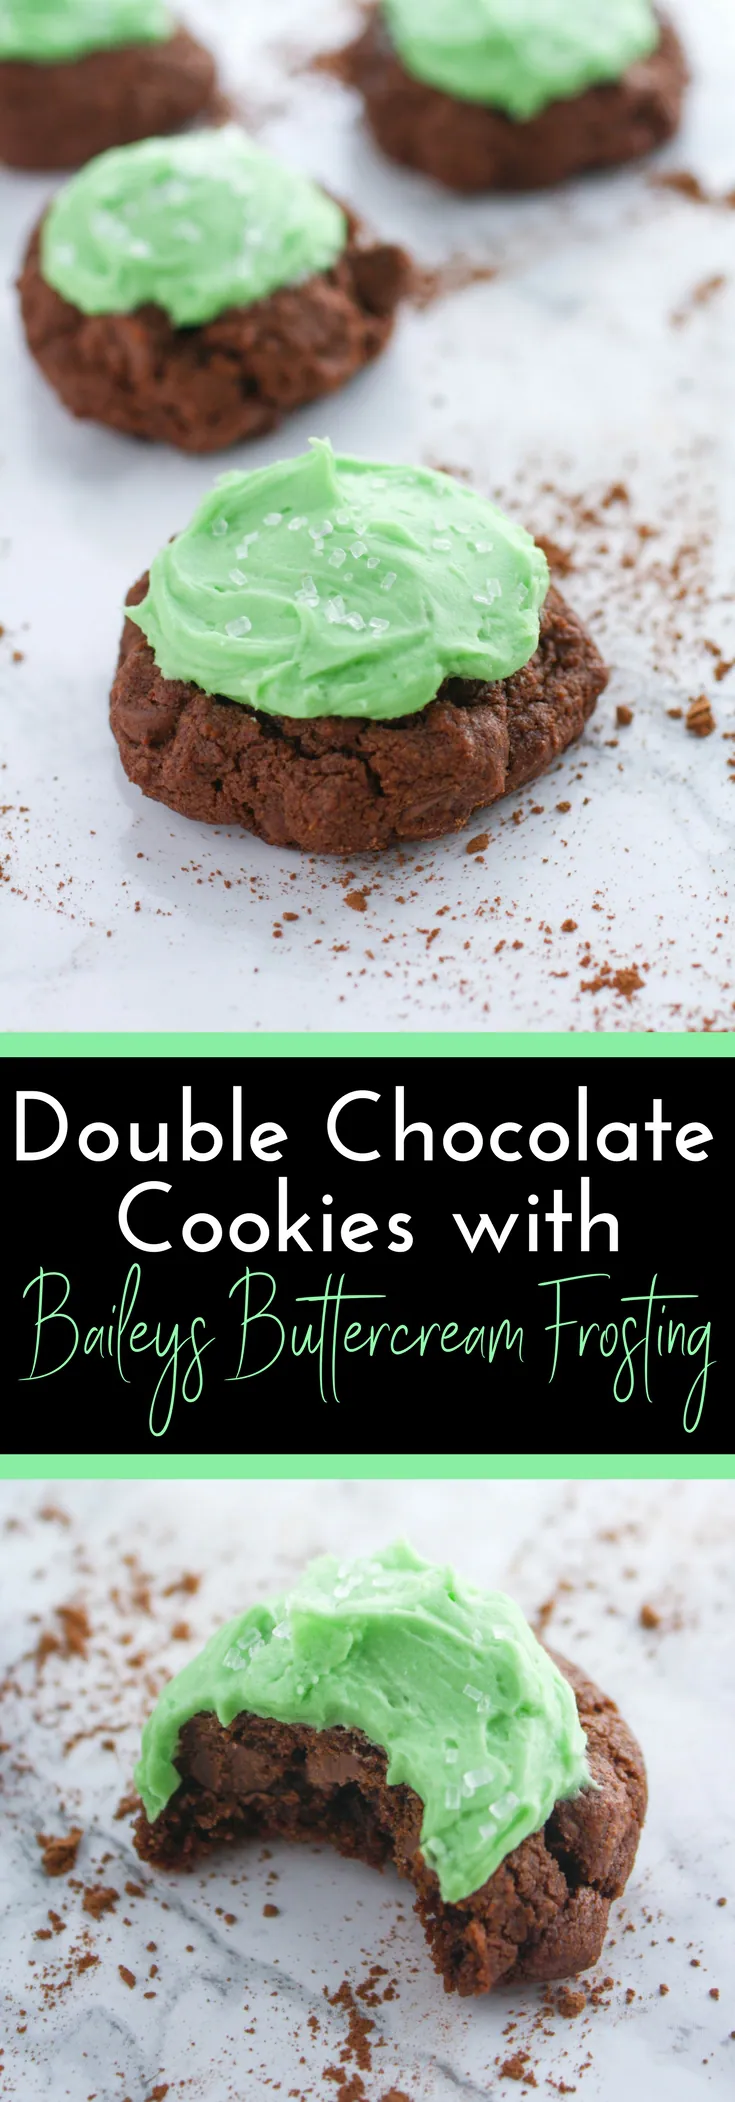 Double Chocolate Cookies with Baileys Buttercream Frosting are the perfect treats to help celebrate St. Patrick's Day! Enjoy these Double Chocolate Cookies with Baileys Buttercream Frosting any day of the year, but they're fun for St. Patrick's Day!